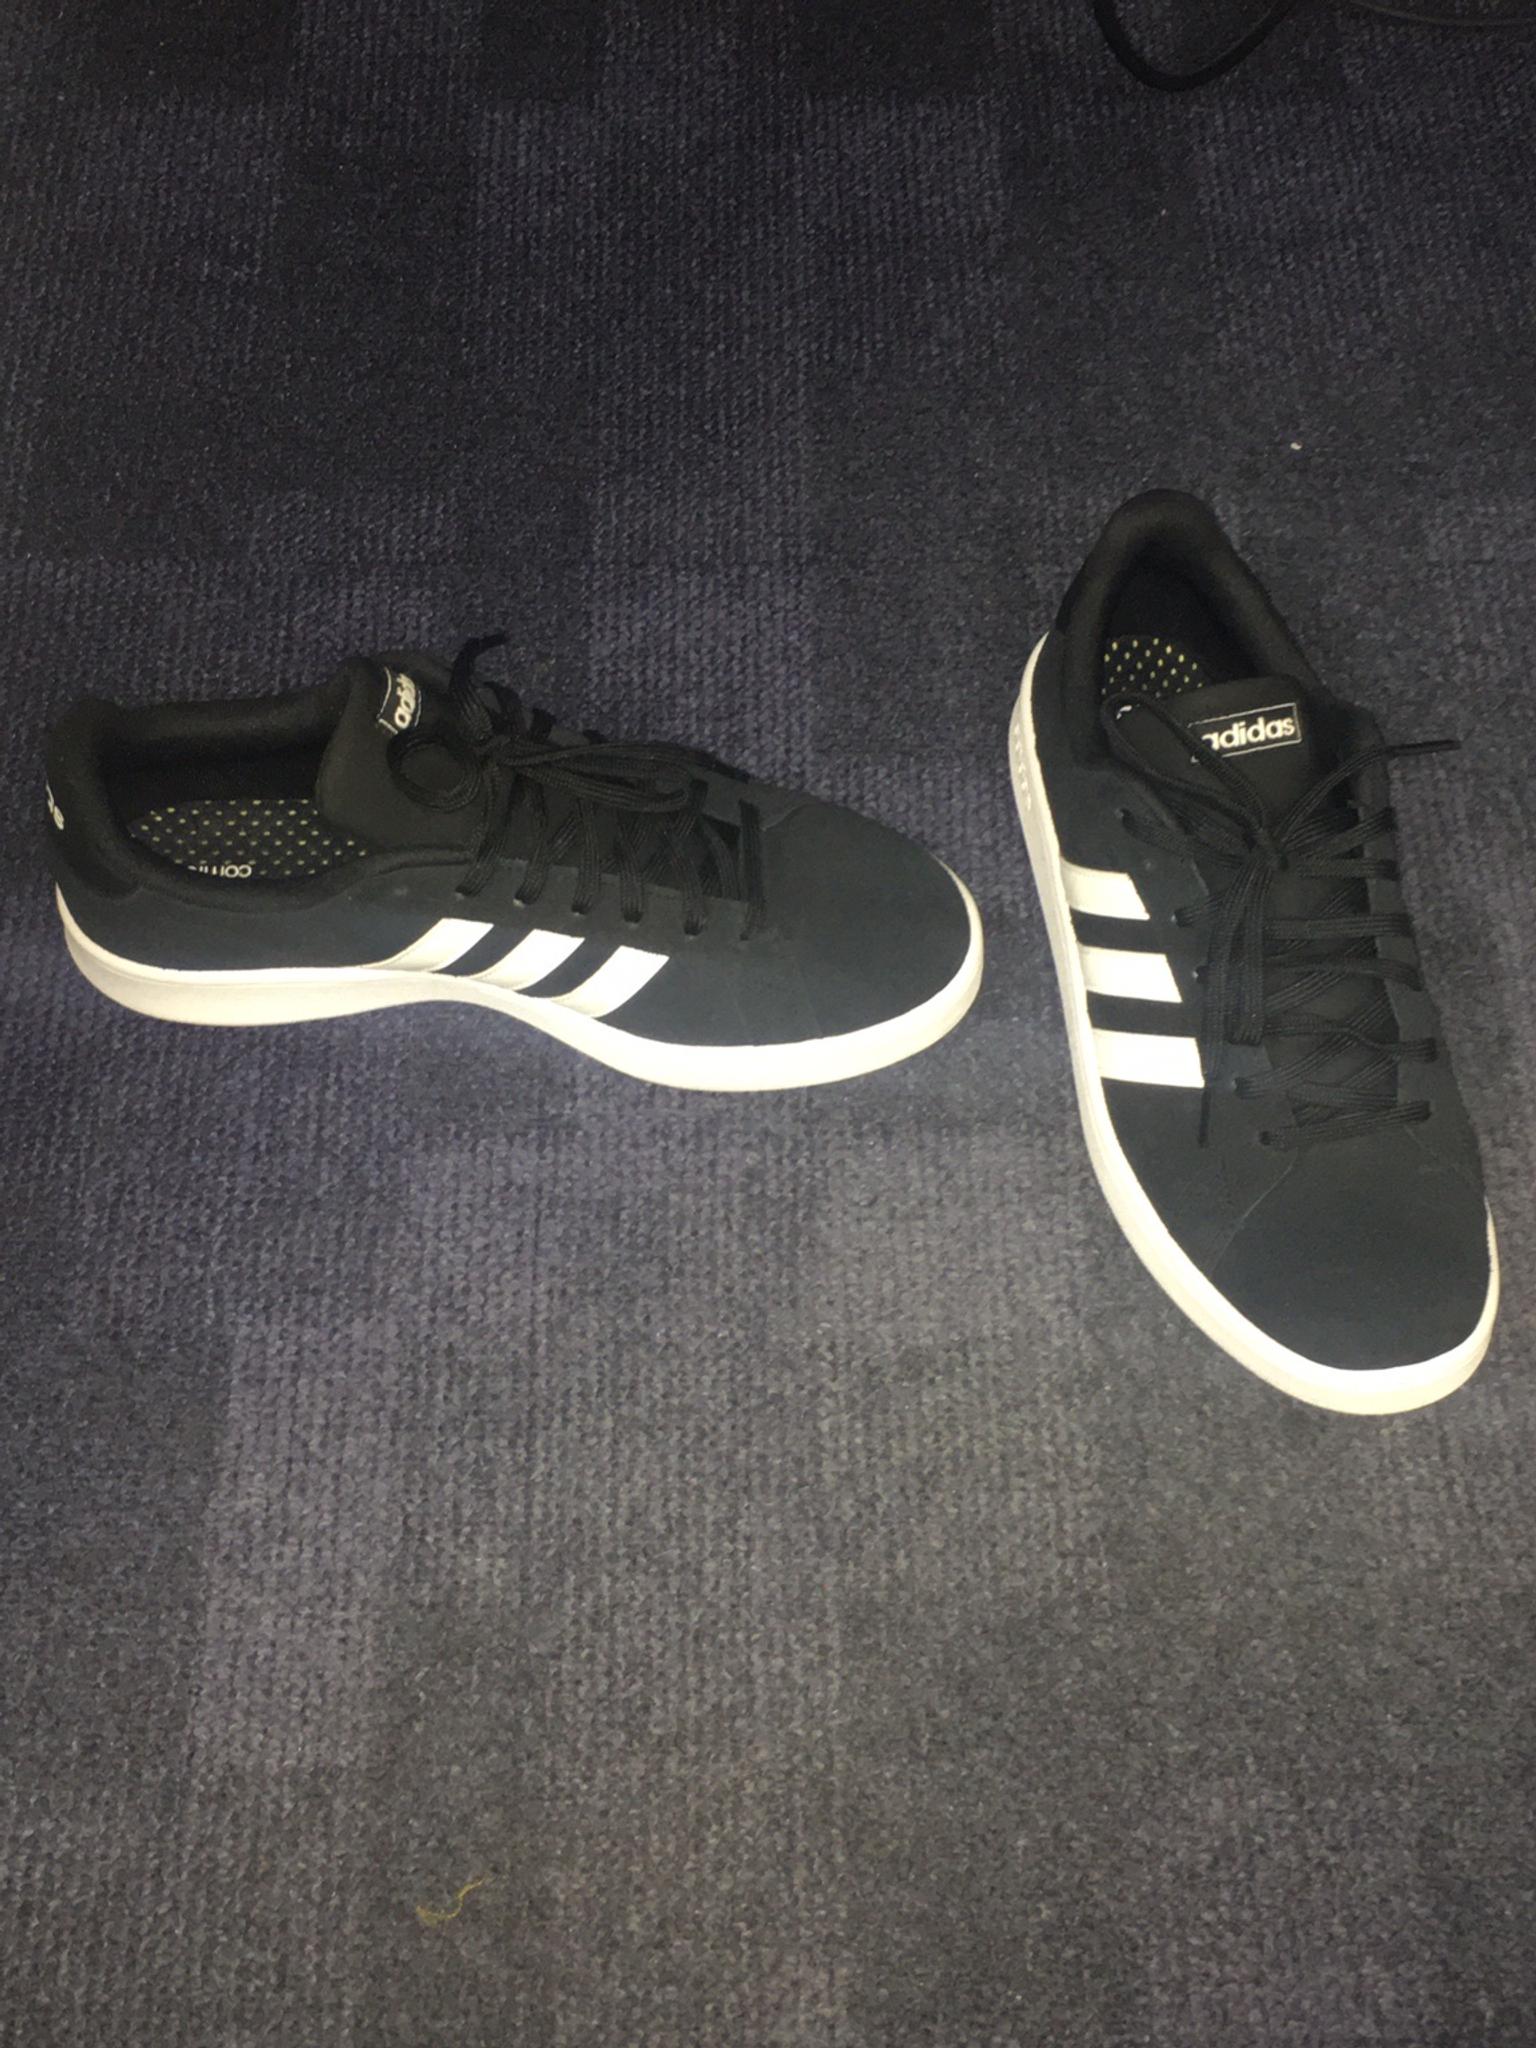 mens adidas trainers sale size 9